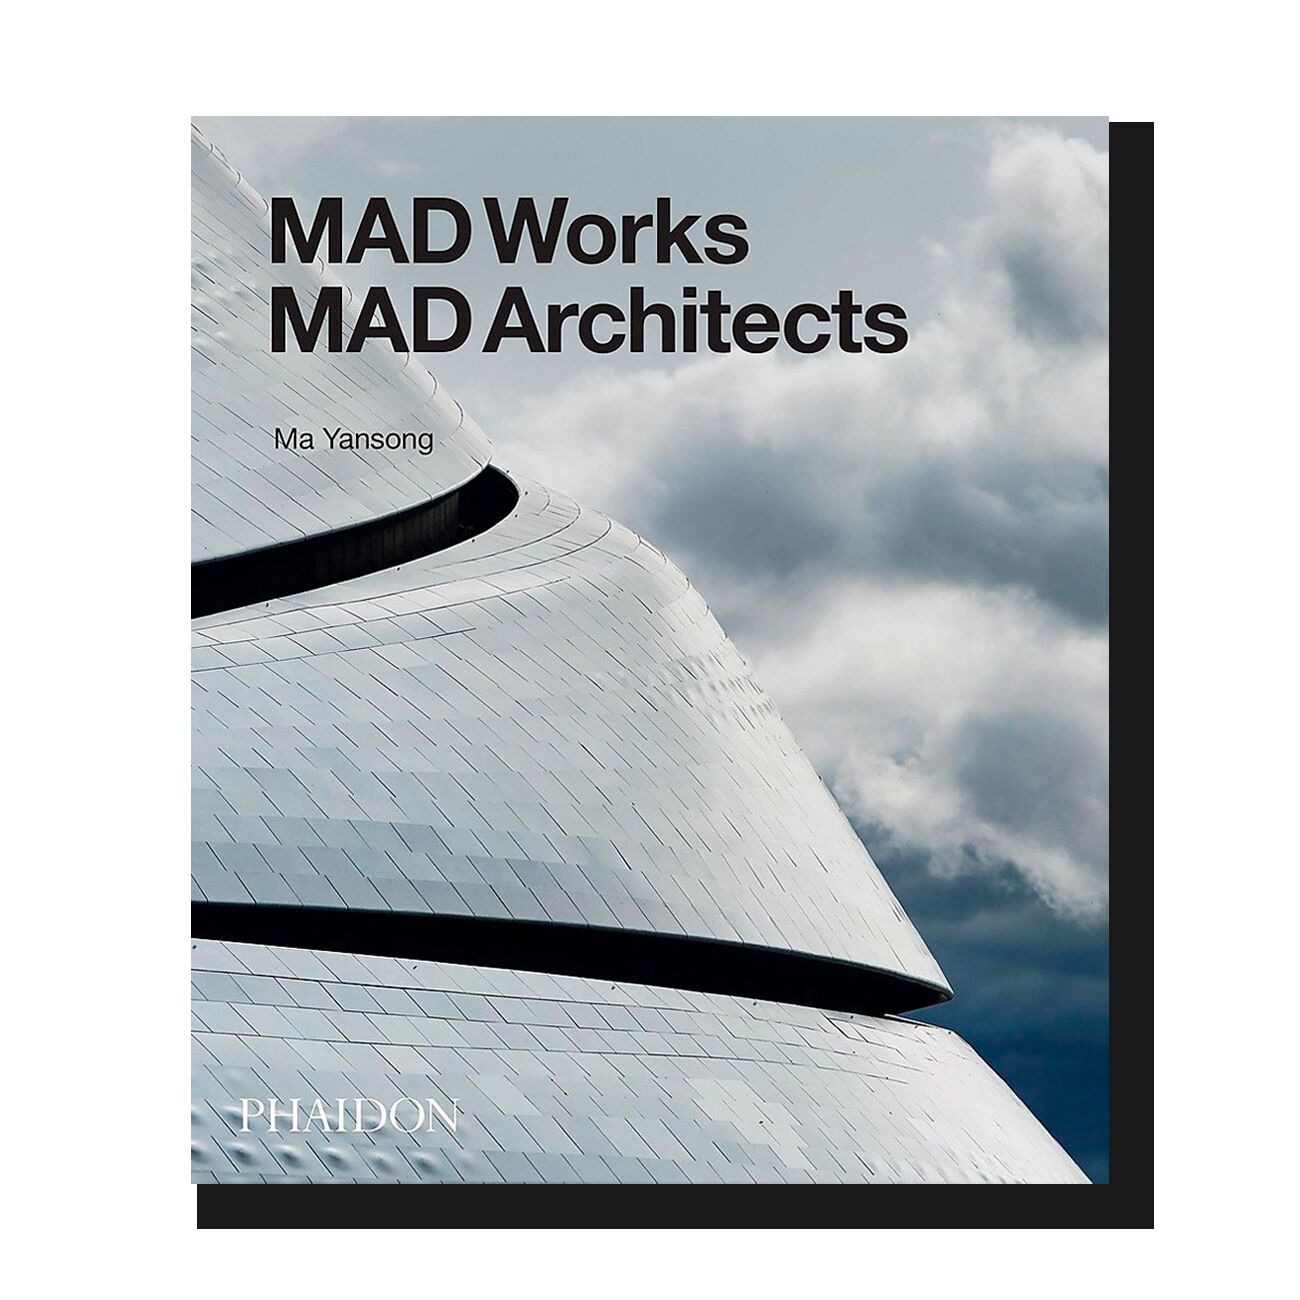 MAD Works MAD Architects